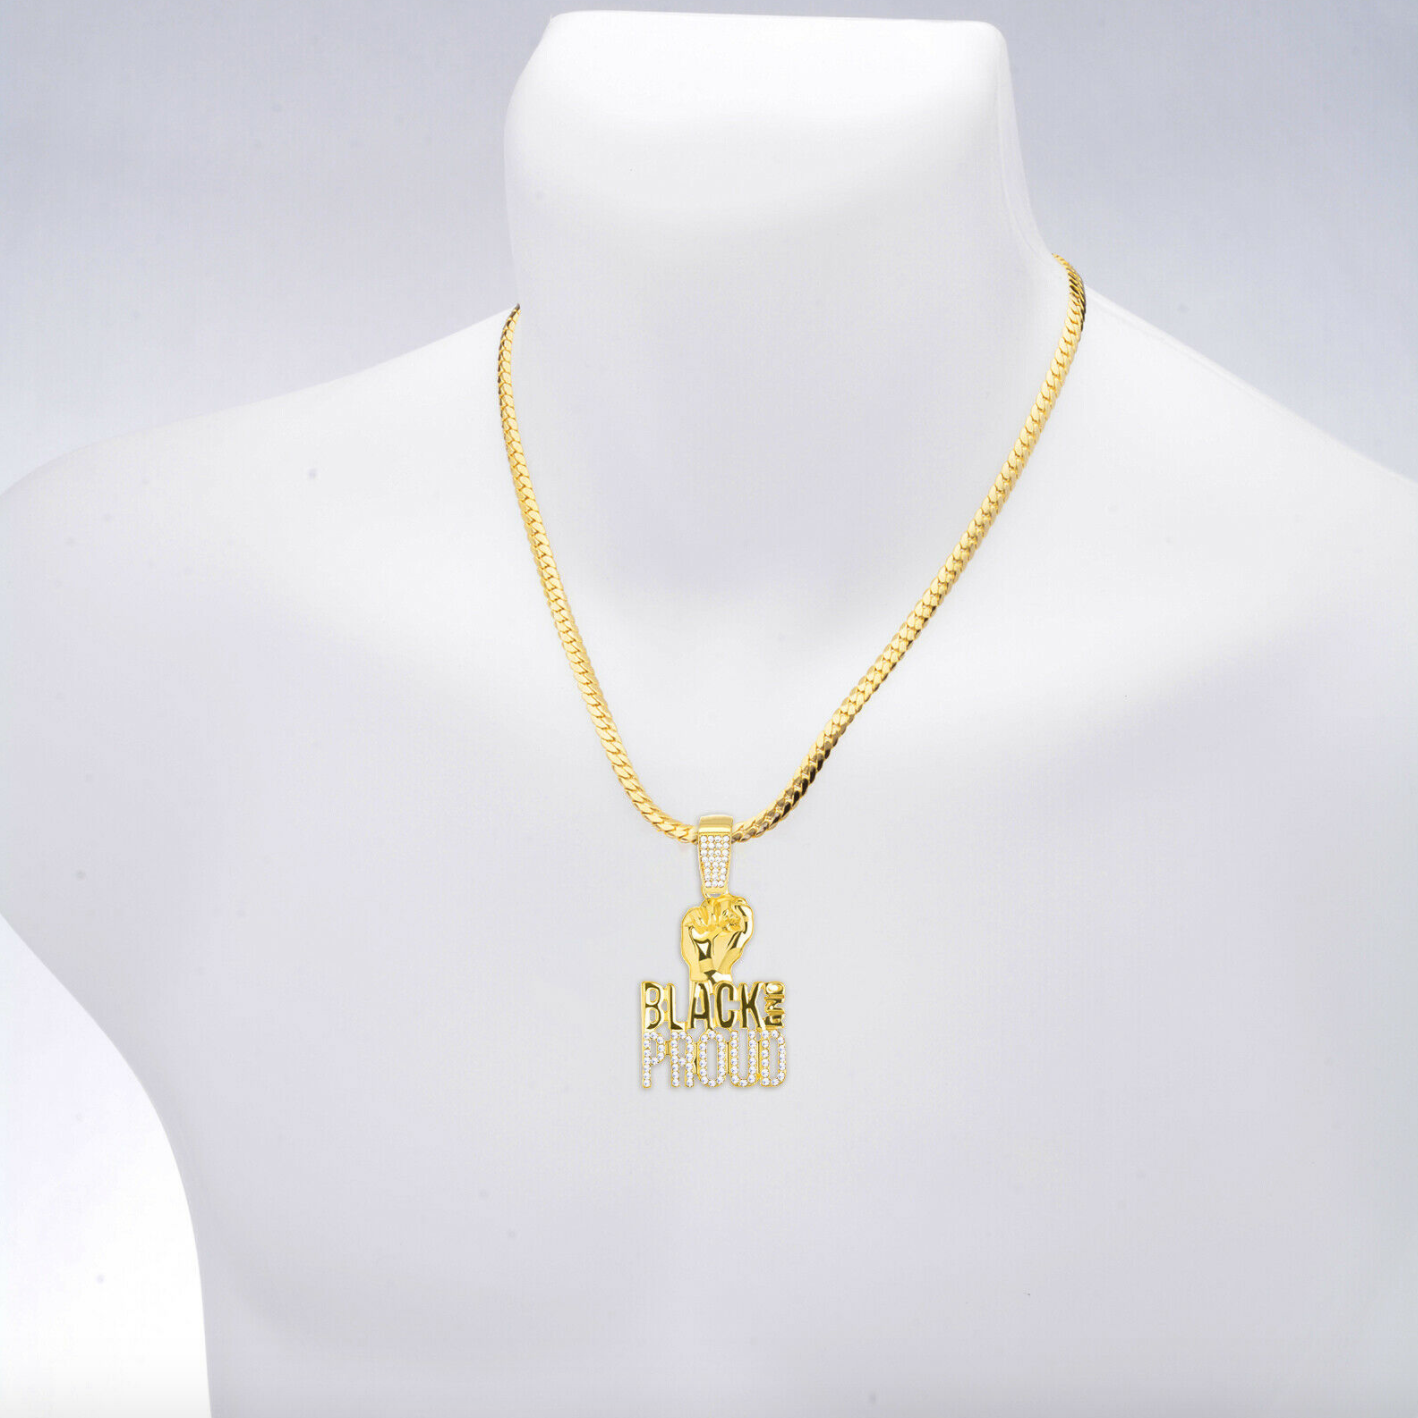 Simulated Diamond Black Lives Matter Necklace BLM Pendant Fist Gold Color Metal Alloy Chain Hip Hop Plated Black Proud Sign 24in.